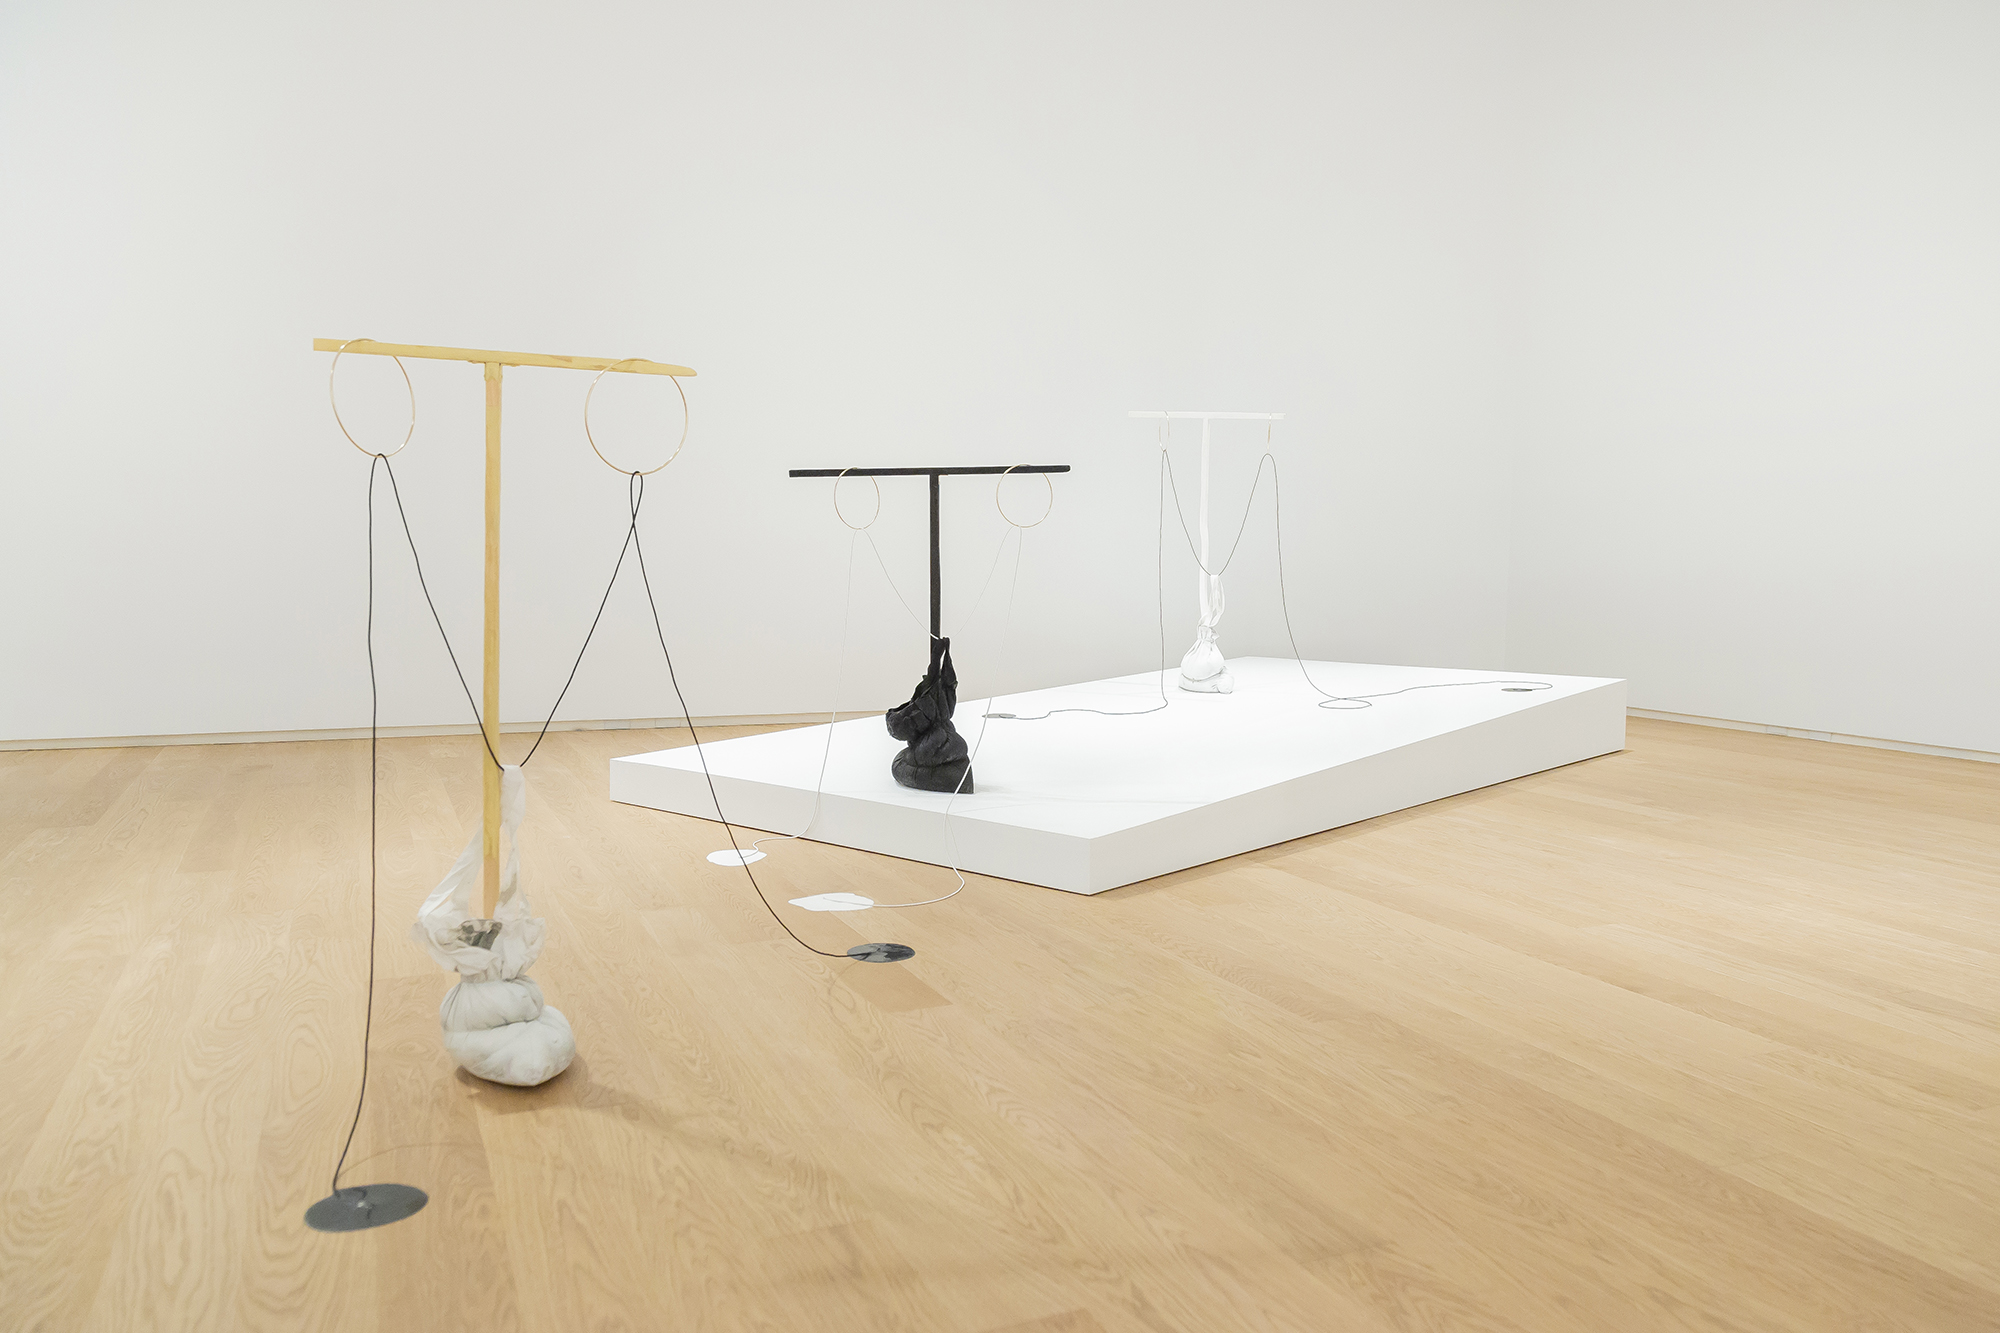 Walter Scott, left to right: Nadia; Tonight, Today; Benevolent Replies, all works 2018. Installation view, Walter Scott: Betazoid in a Fog, Remai Modern, 2018.  Photo: Carrie Shaw.